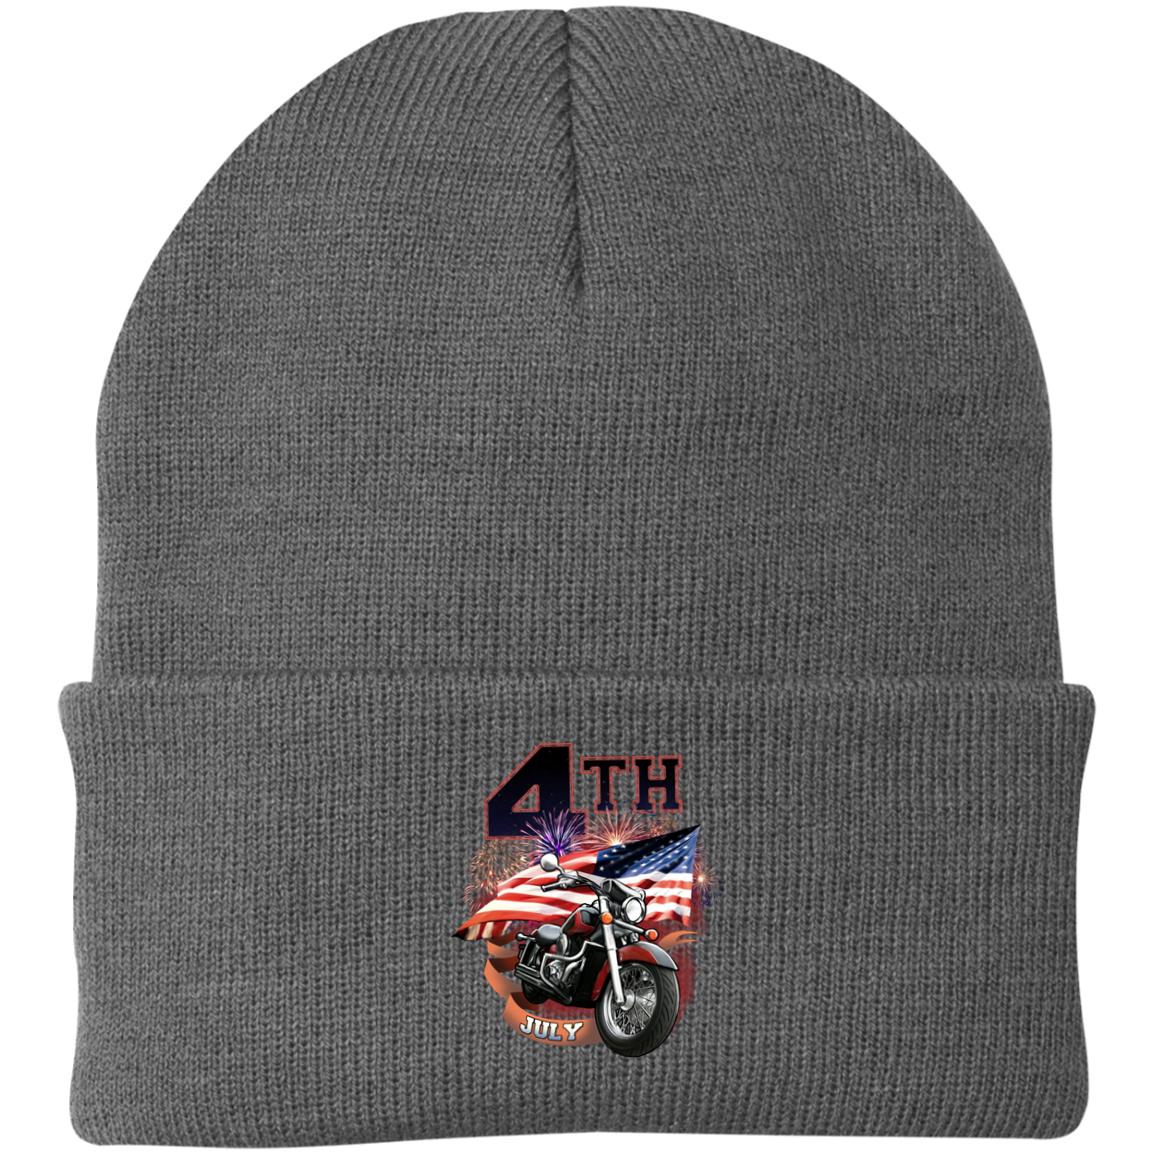 4th of July Knit Cap, Unisex, Acrylic, One Size Fits Most - American Legend Rider